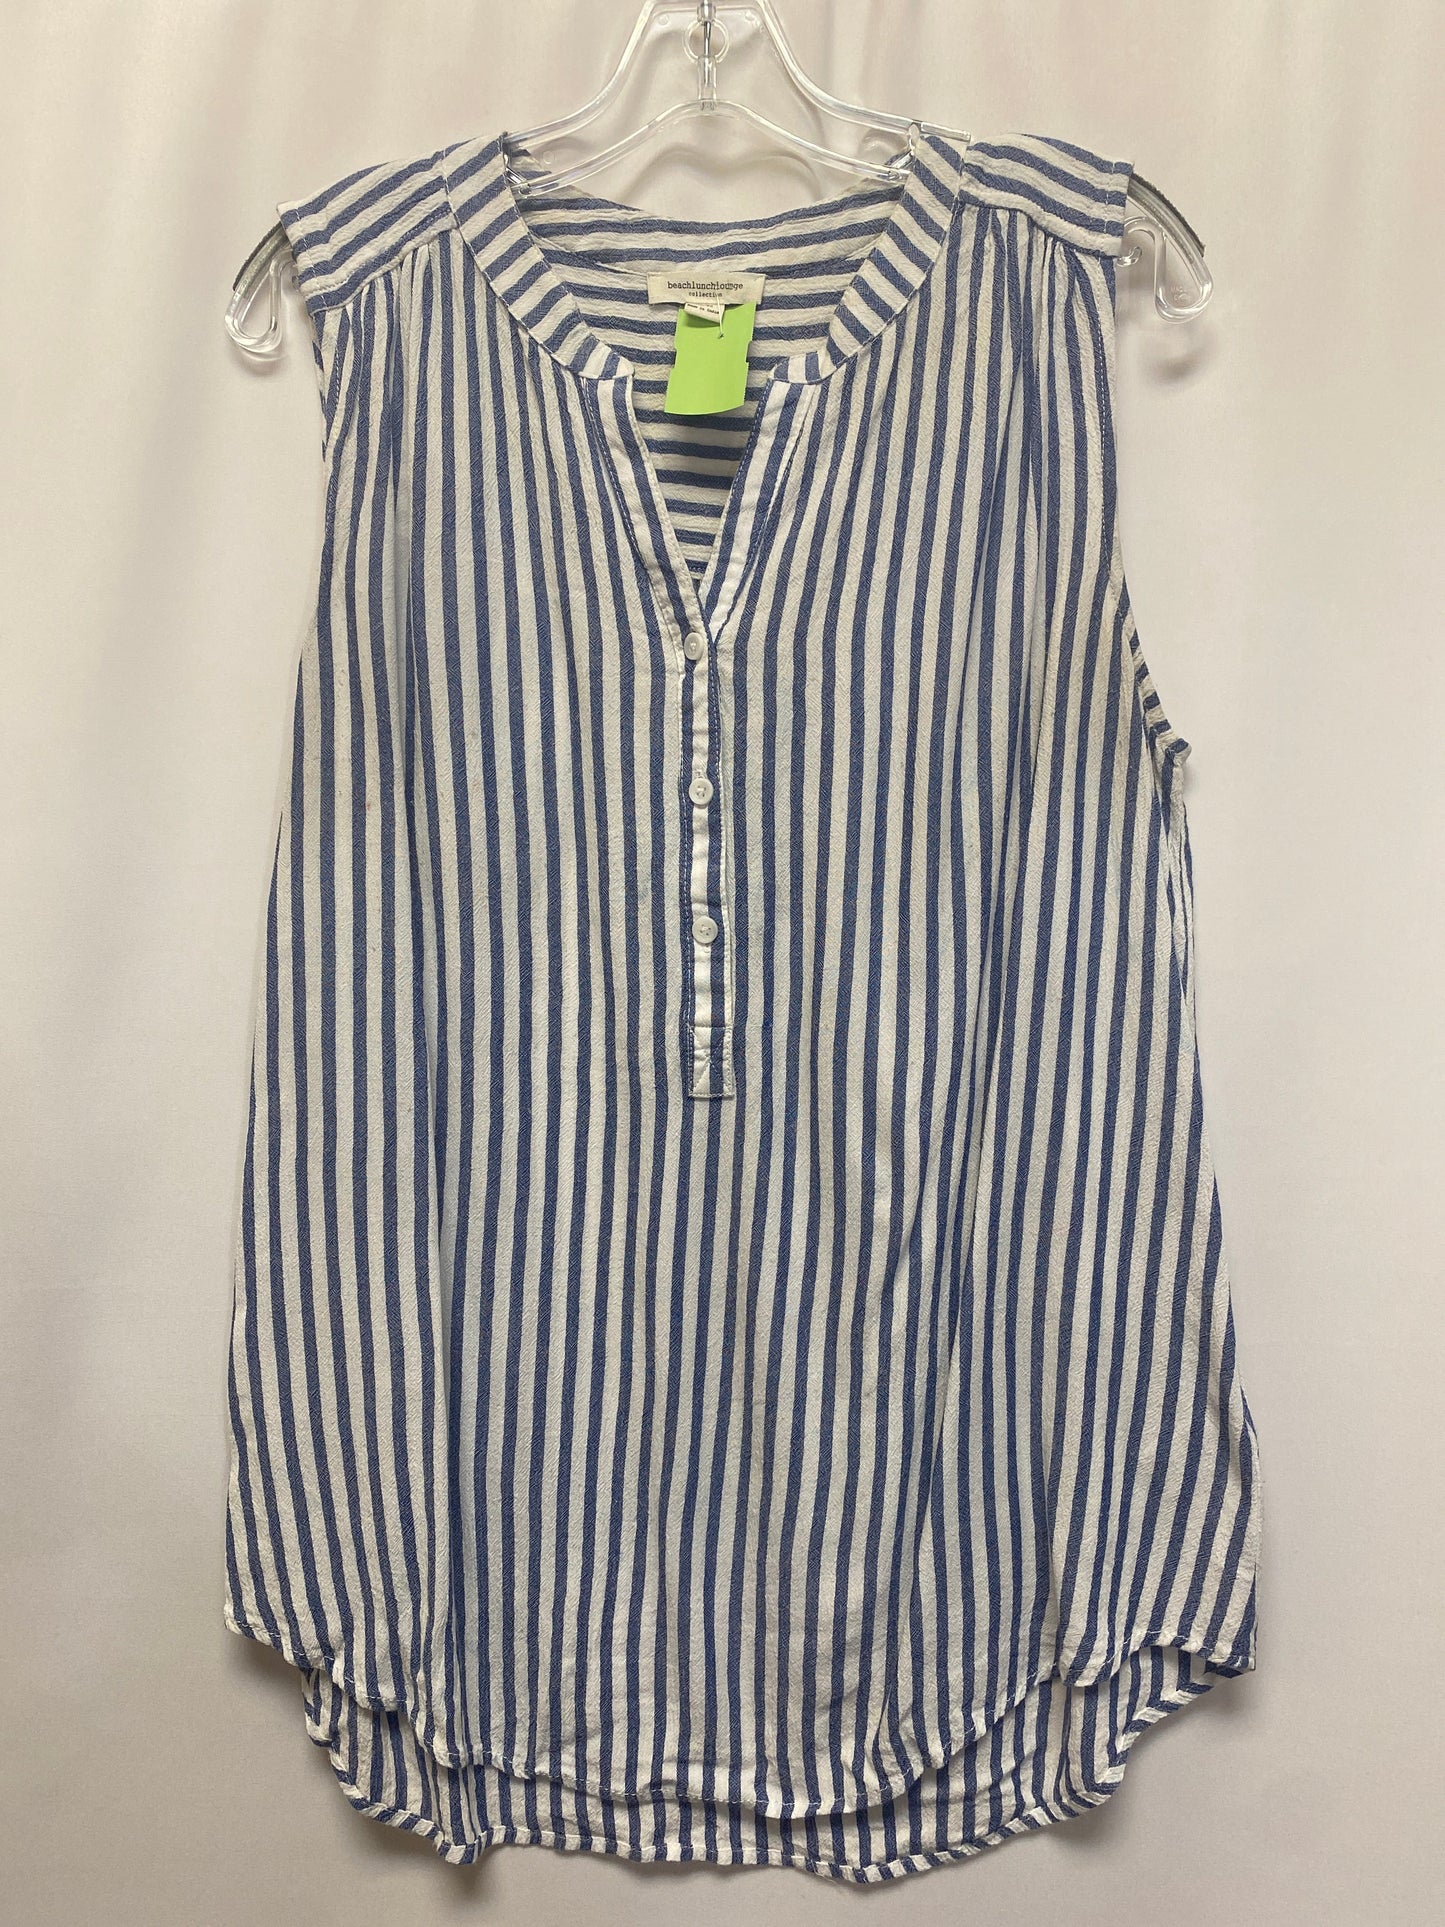 Top Sleeveless By Beachlunchlounge  Size: M